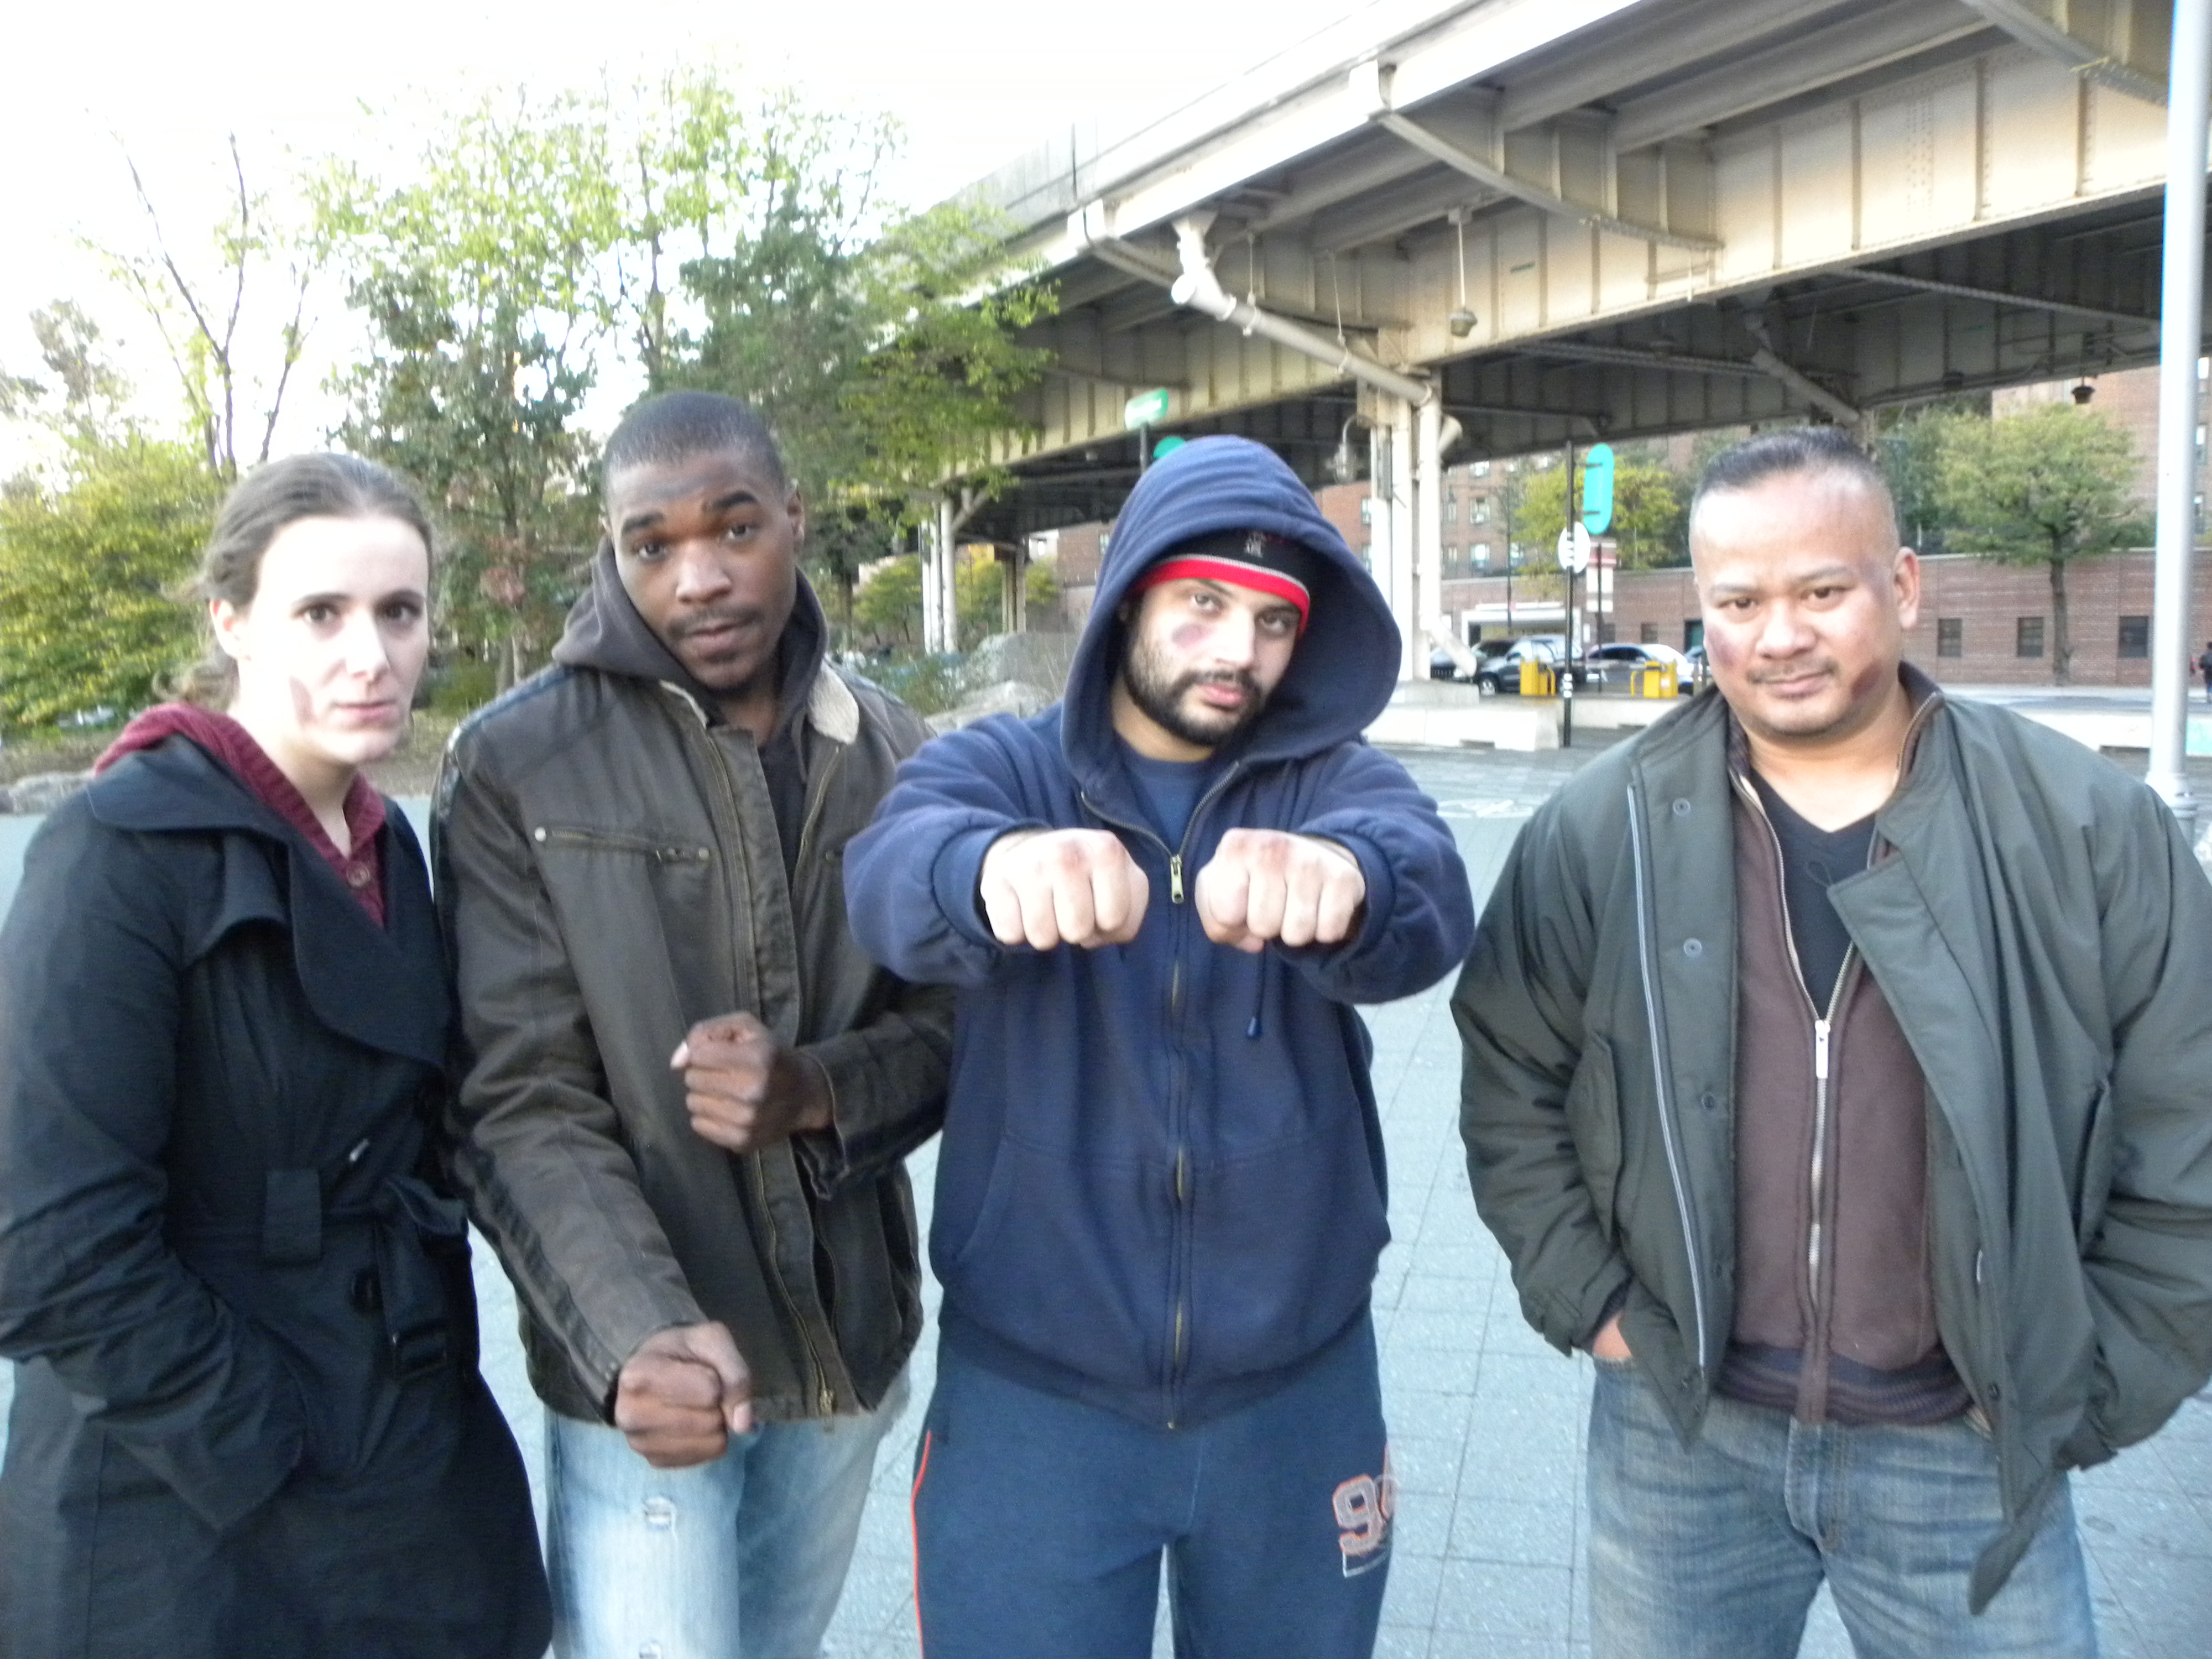 Behind the scenes of A Fool's Love with Jenna Conroy, Russel Bookert, Shindo Ki Rodriguez and Joseph Villapaz.